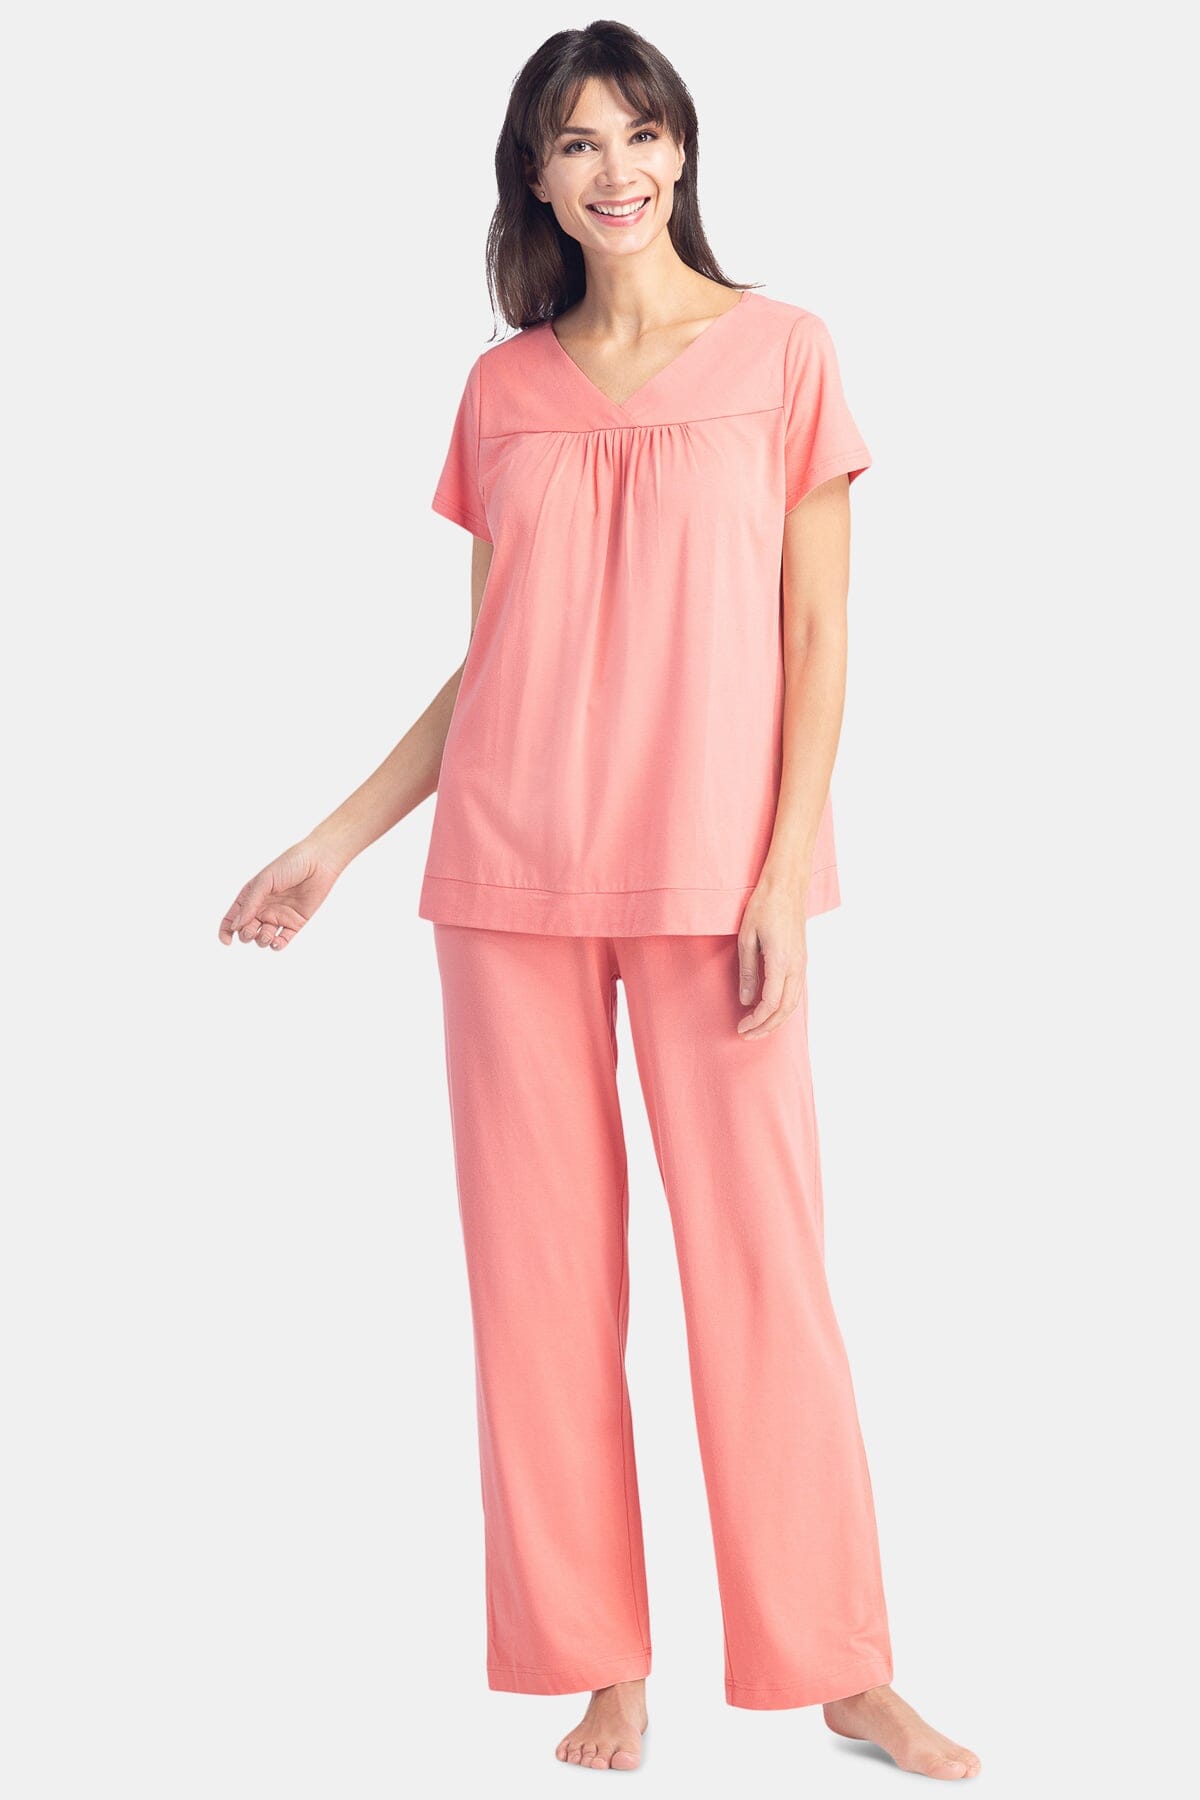 Women's Jersey Pajama Set with Gift Box- Short Sleeve Top and Full Length Pant Womens>Sleep and Lounge>Pajamas Fishers Finery Coral XS 